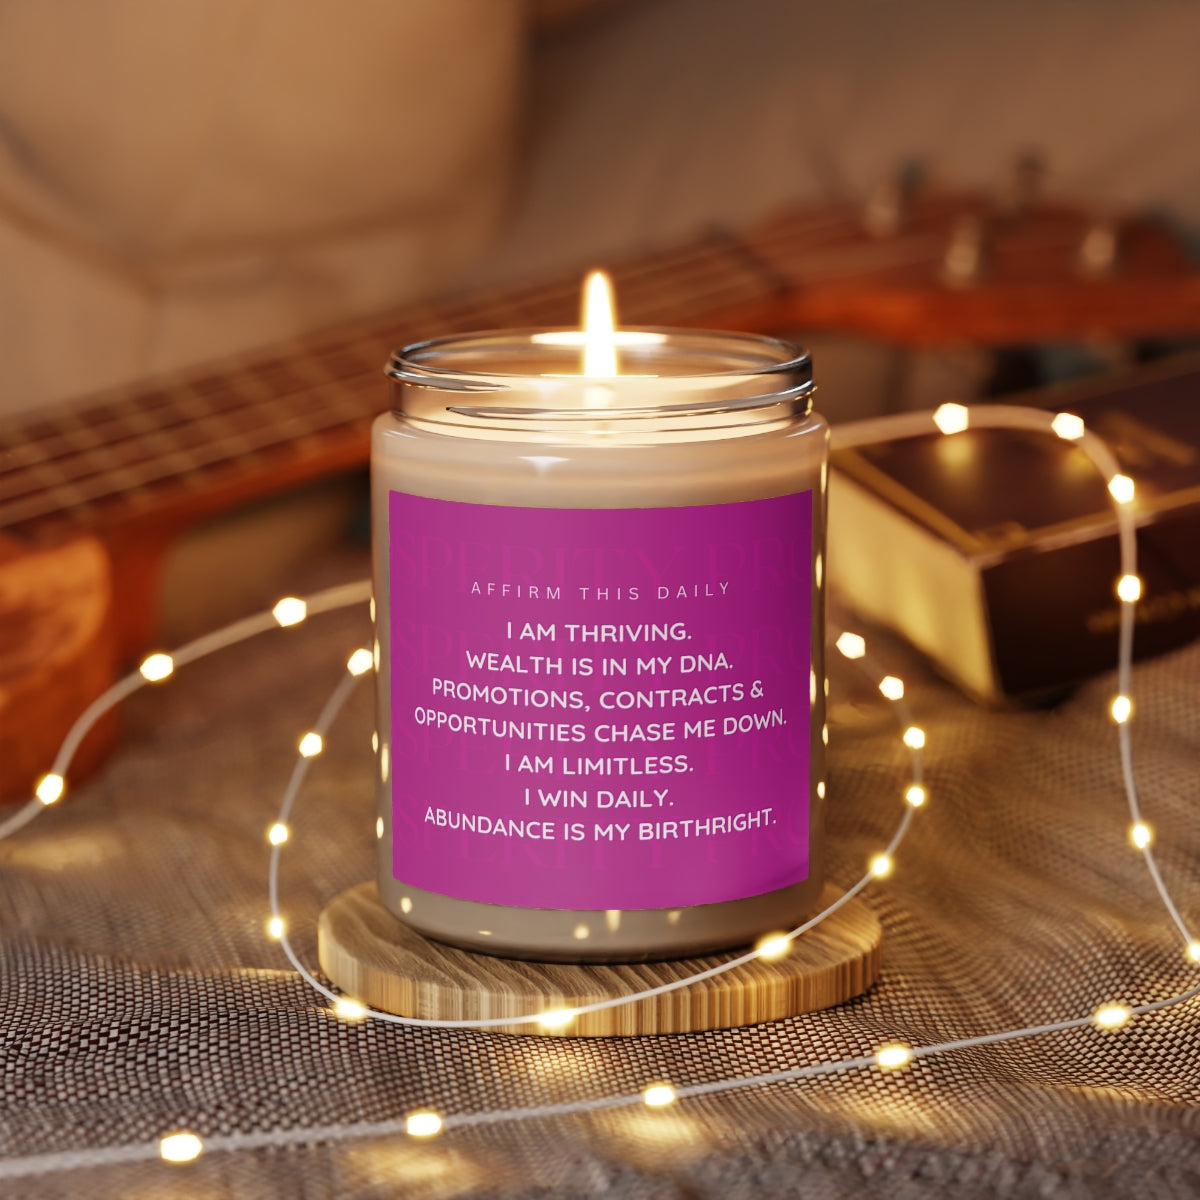 "Prosperity" Affirmation Scented Candle, 9oz